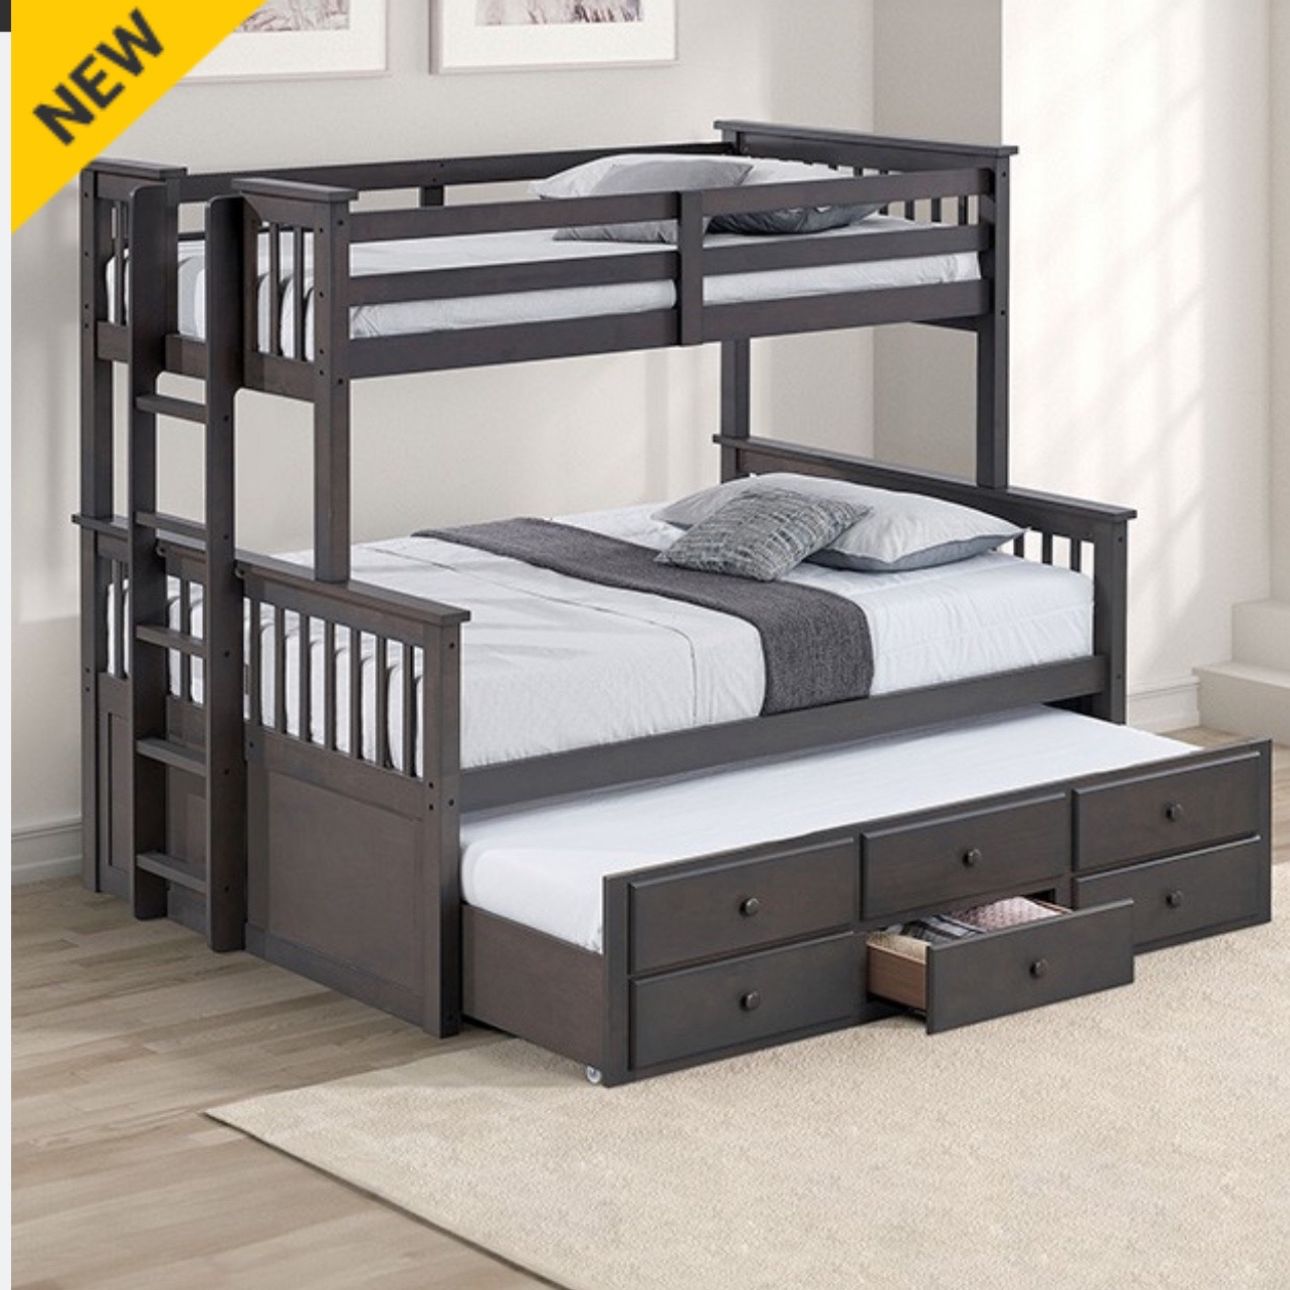 TWIN OVER FULL BUNK BEDS (FREE DELIVERY) 